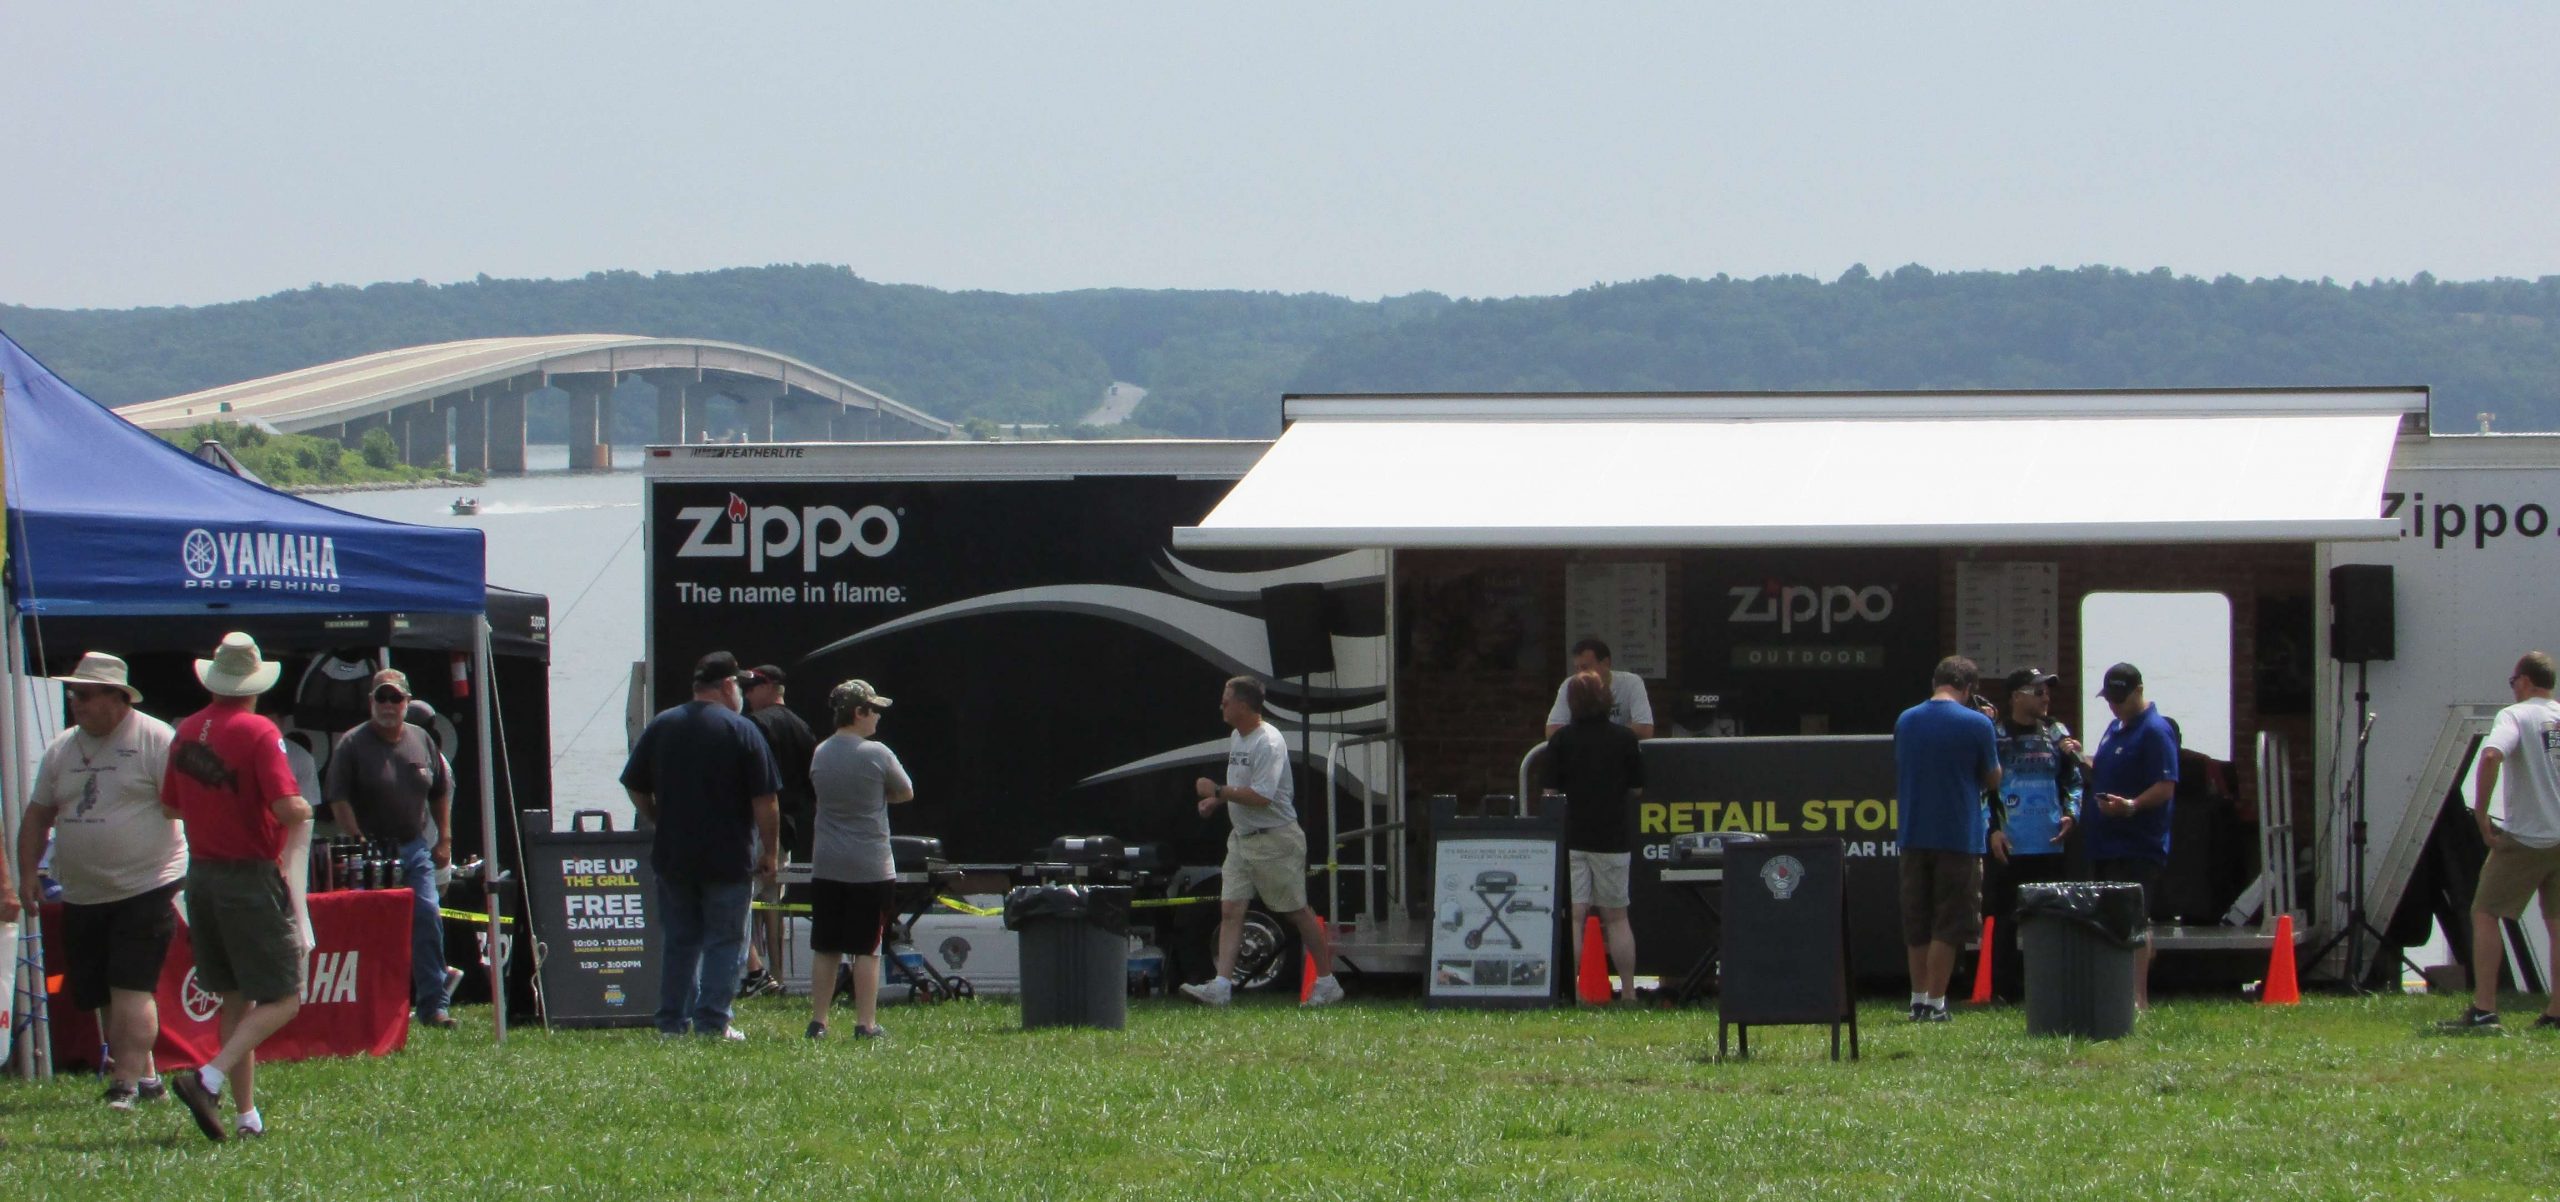 BASSfest sponsor Zippo had friendly staff on-hand to answer questions.